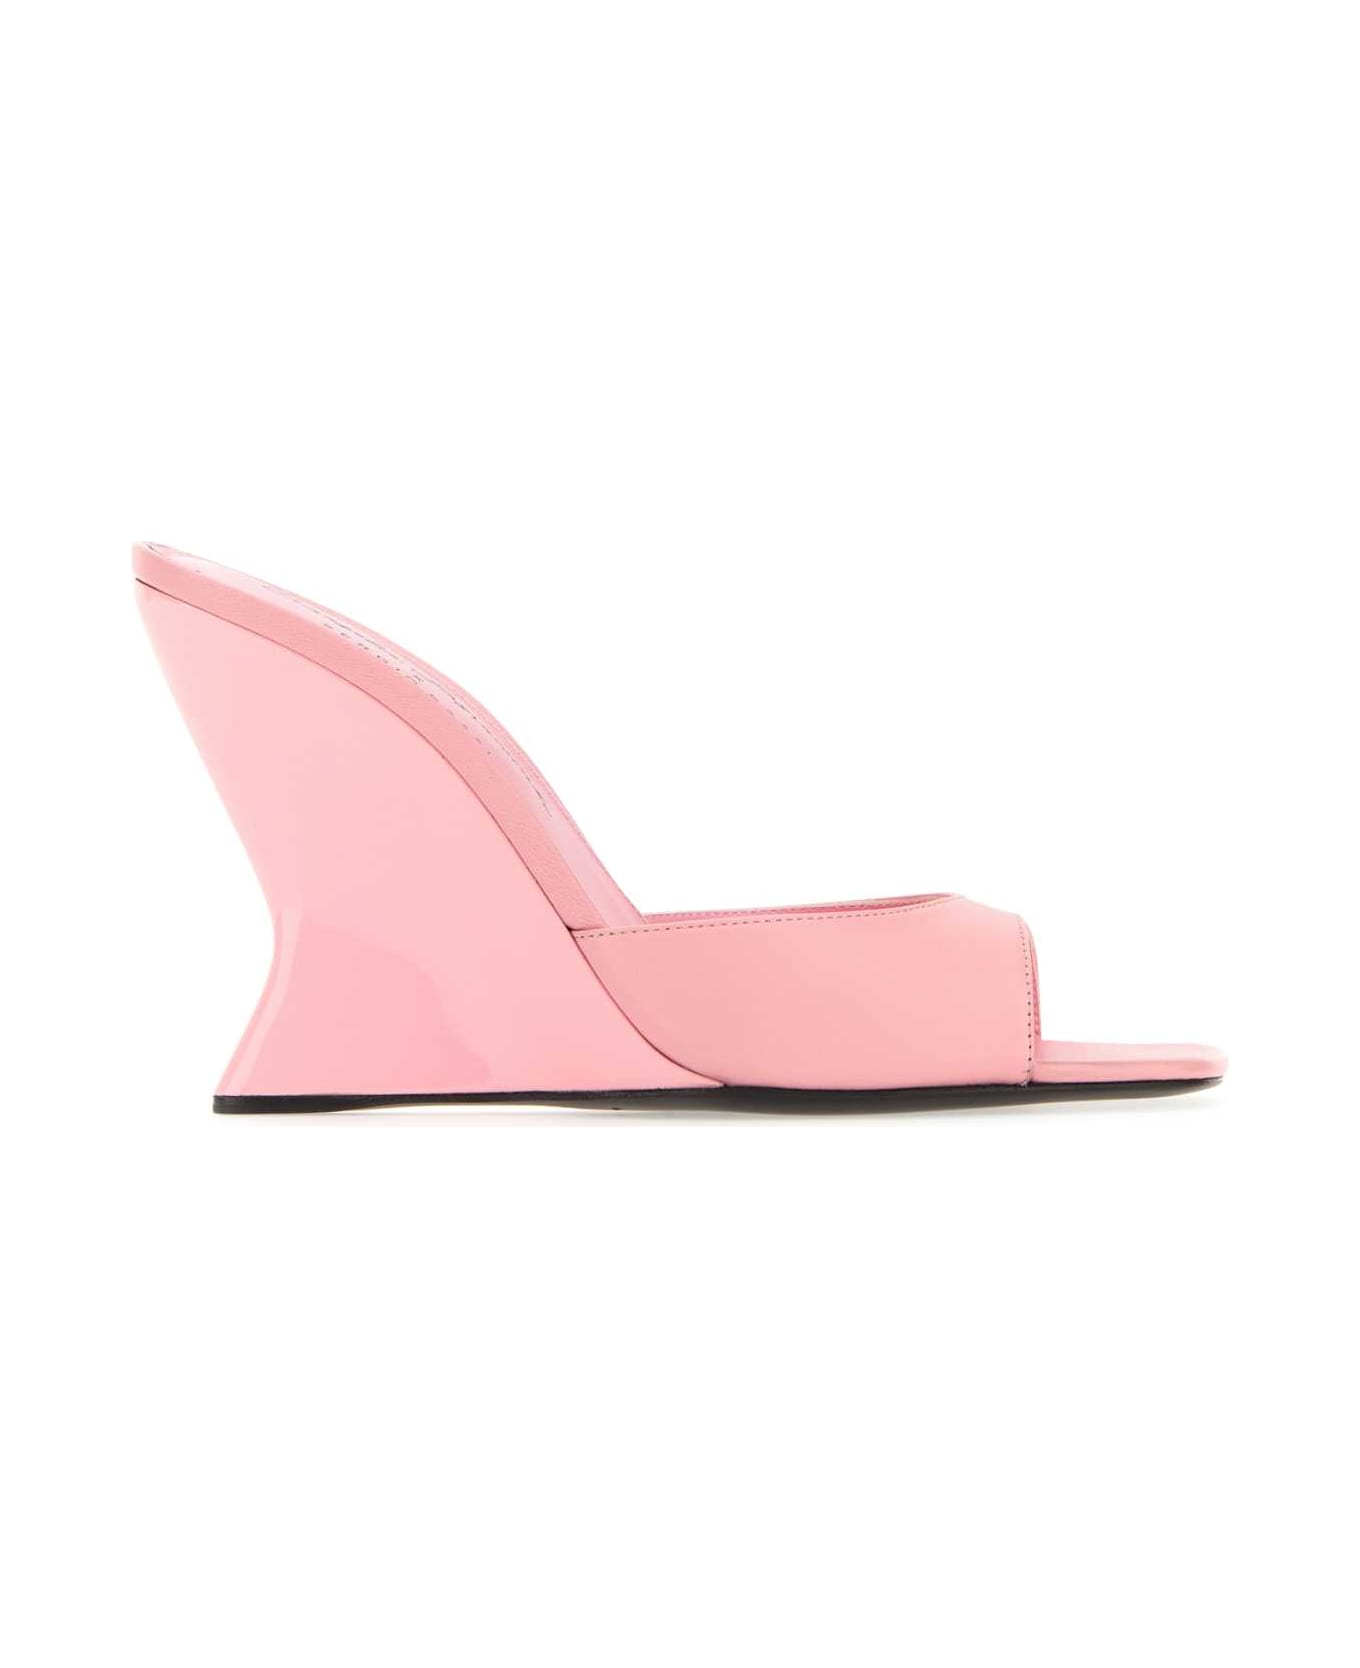 Sergio Rossi Pink Nappa Leather Evangelie Mules - Multicolor